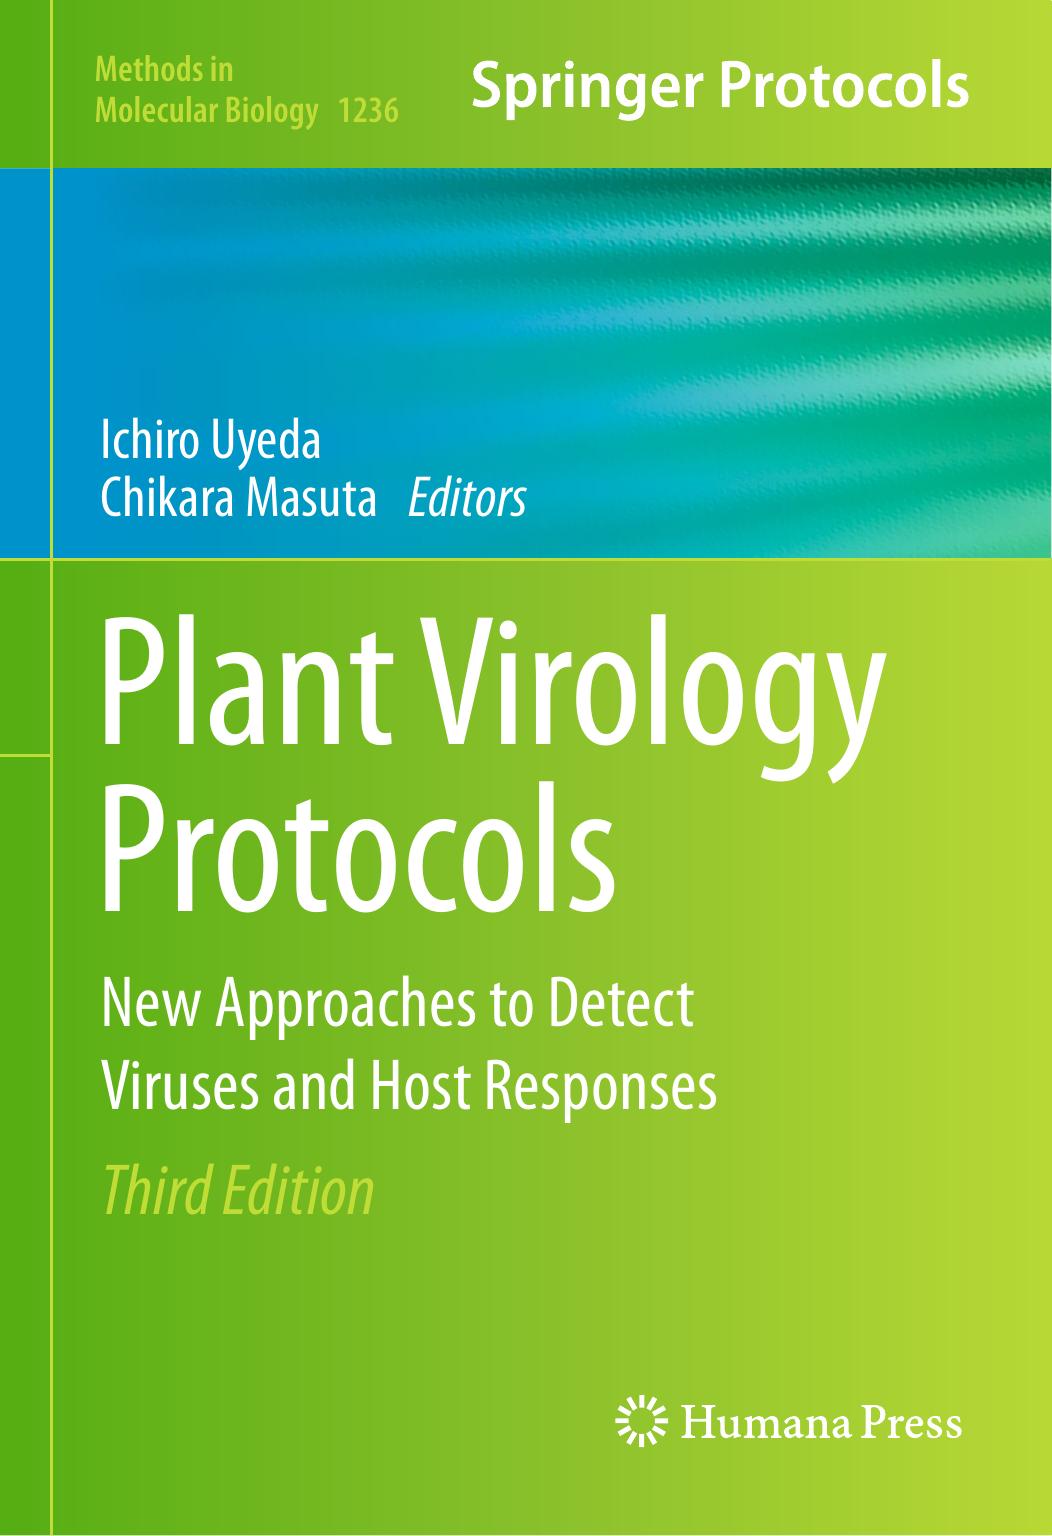 Plant Virology Protocols  New Approaches to Detect Viruses and Host Response 2015